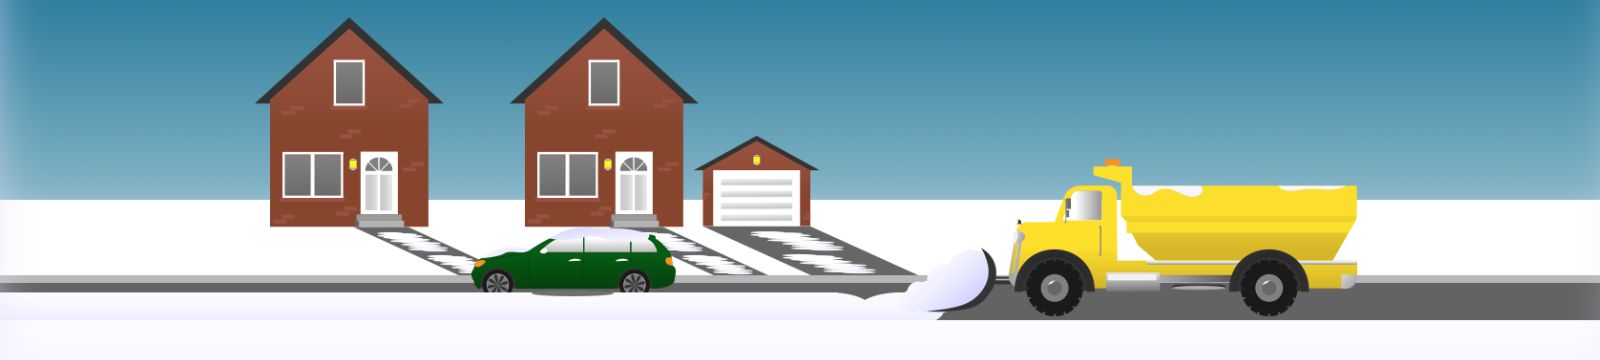 Illustration of car parking and snow plow on street in winter